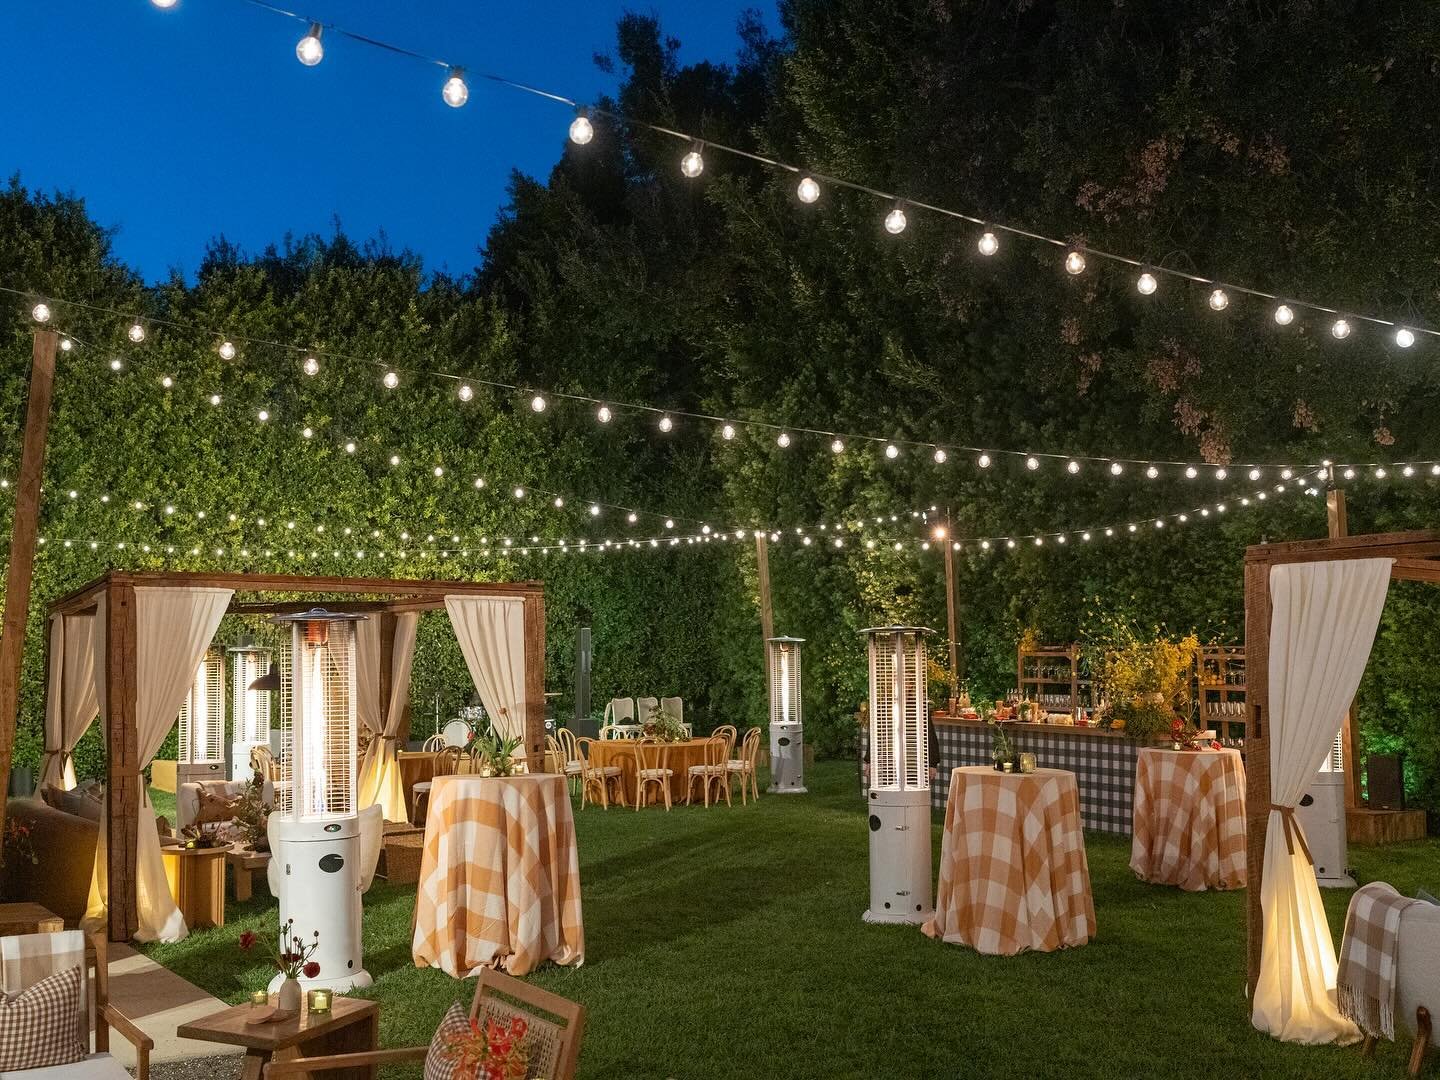 These nighttime views were just as delicious.
Lighting|Wood Fabrication|Draping #ambereventproduction 
Planning|Design @lyndenlane 
Photography @rebeccayale 
Floral @sirenfloralco 
Rentals @foundrentalco @edgedesigndecor @townandcountry_eventrentals 